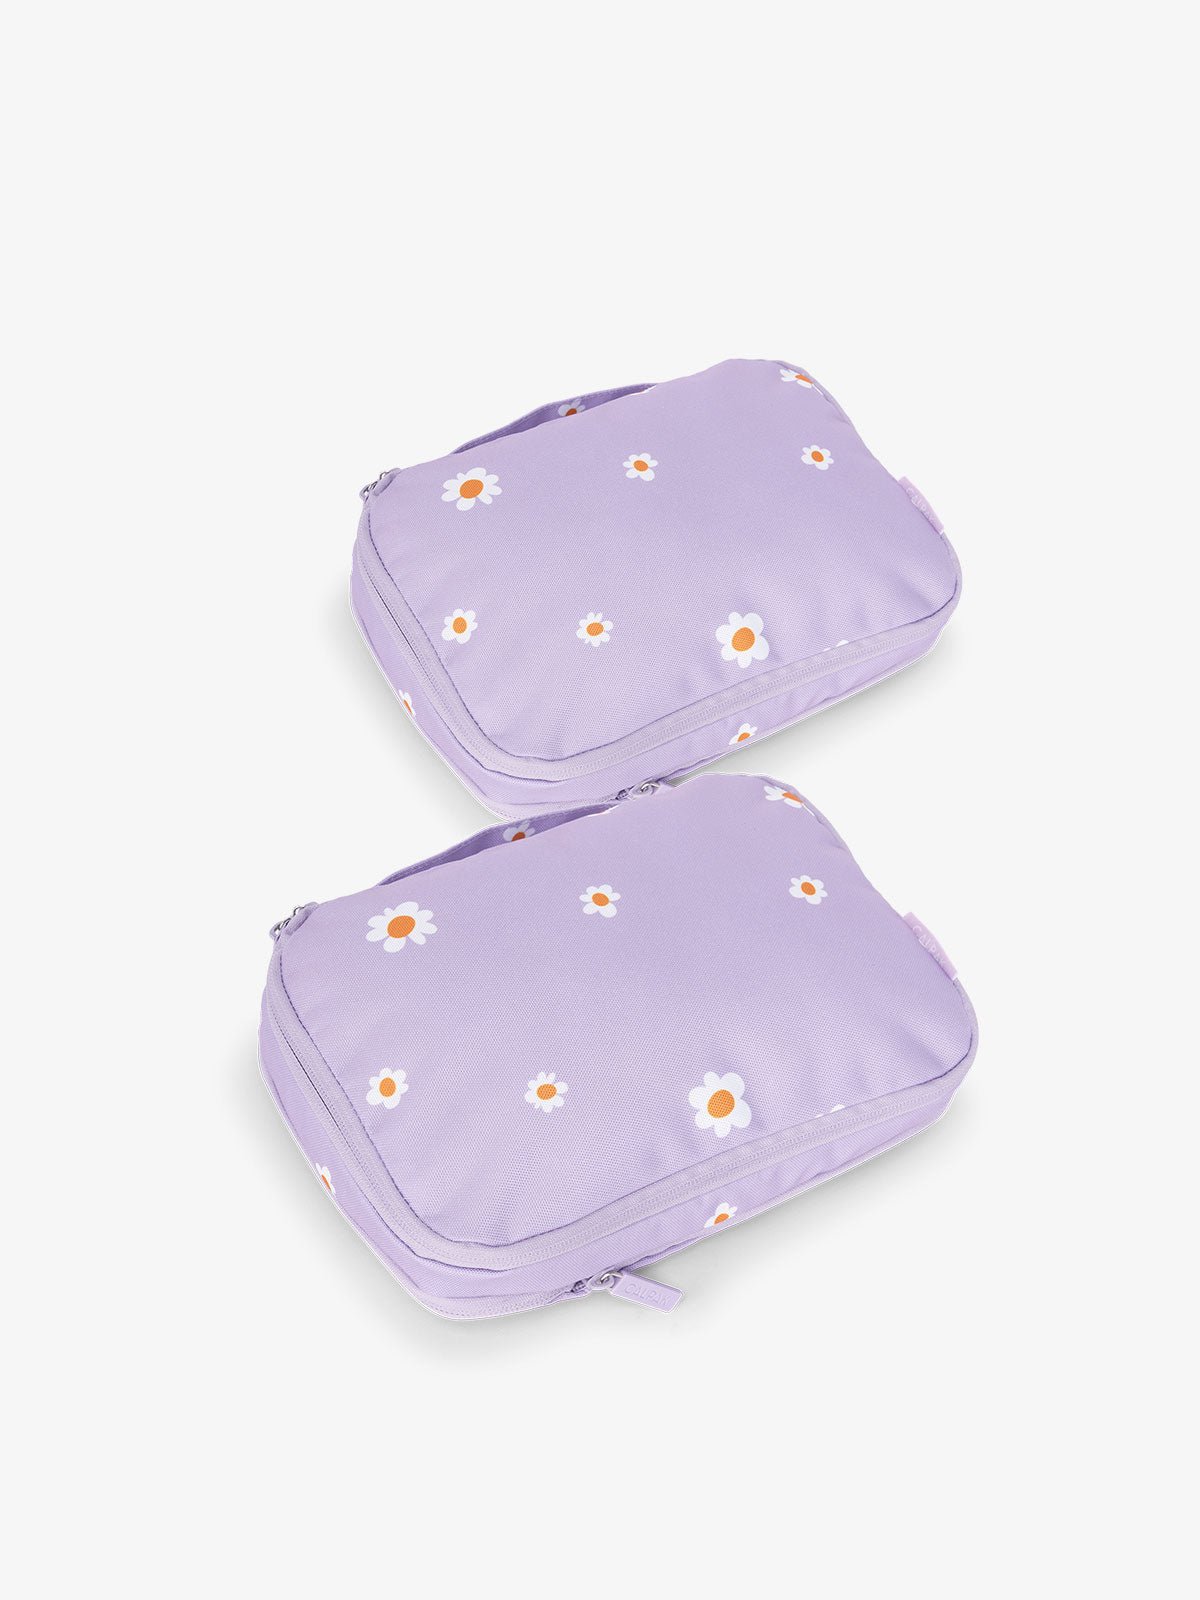 CALPAK small compression packing cubes in purple floral print